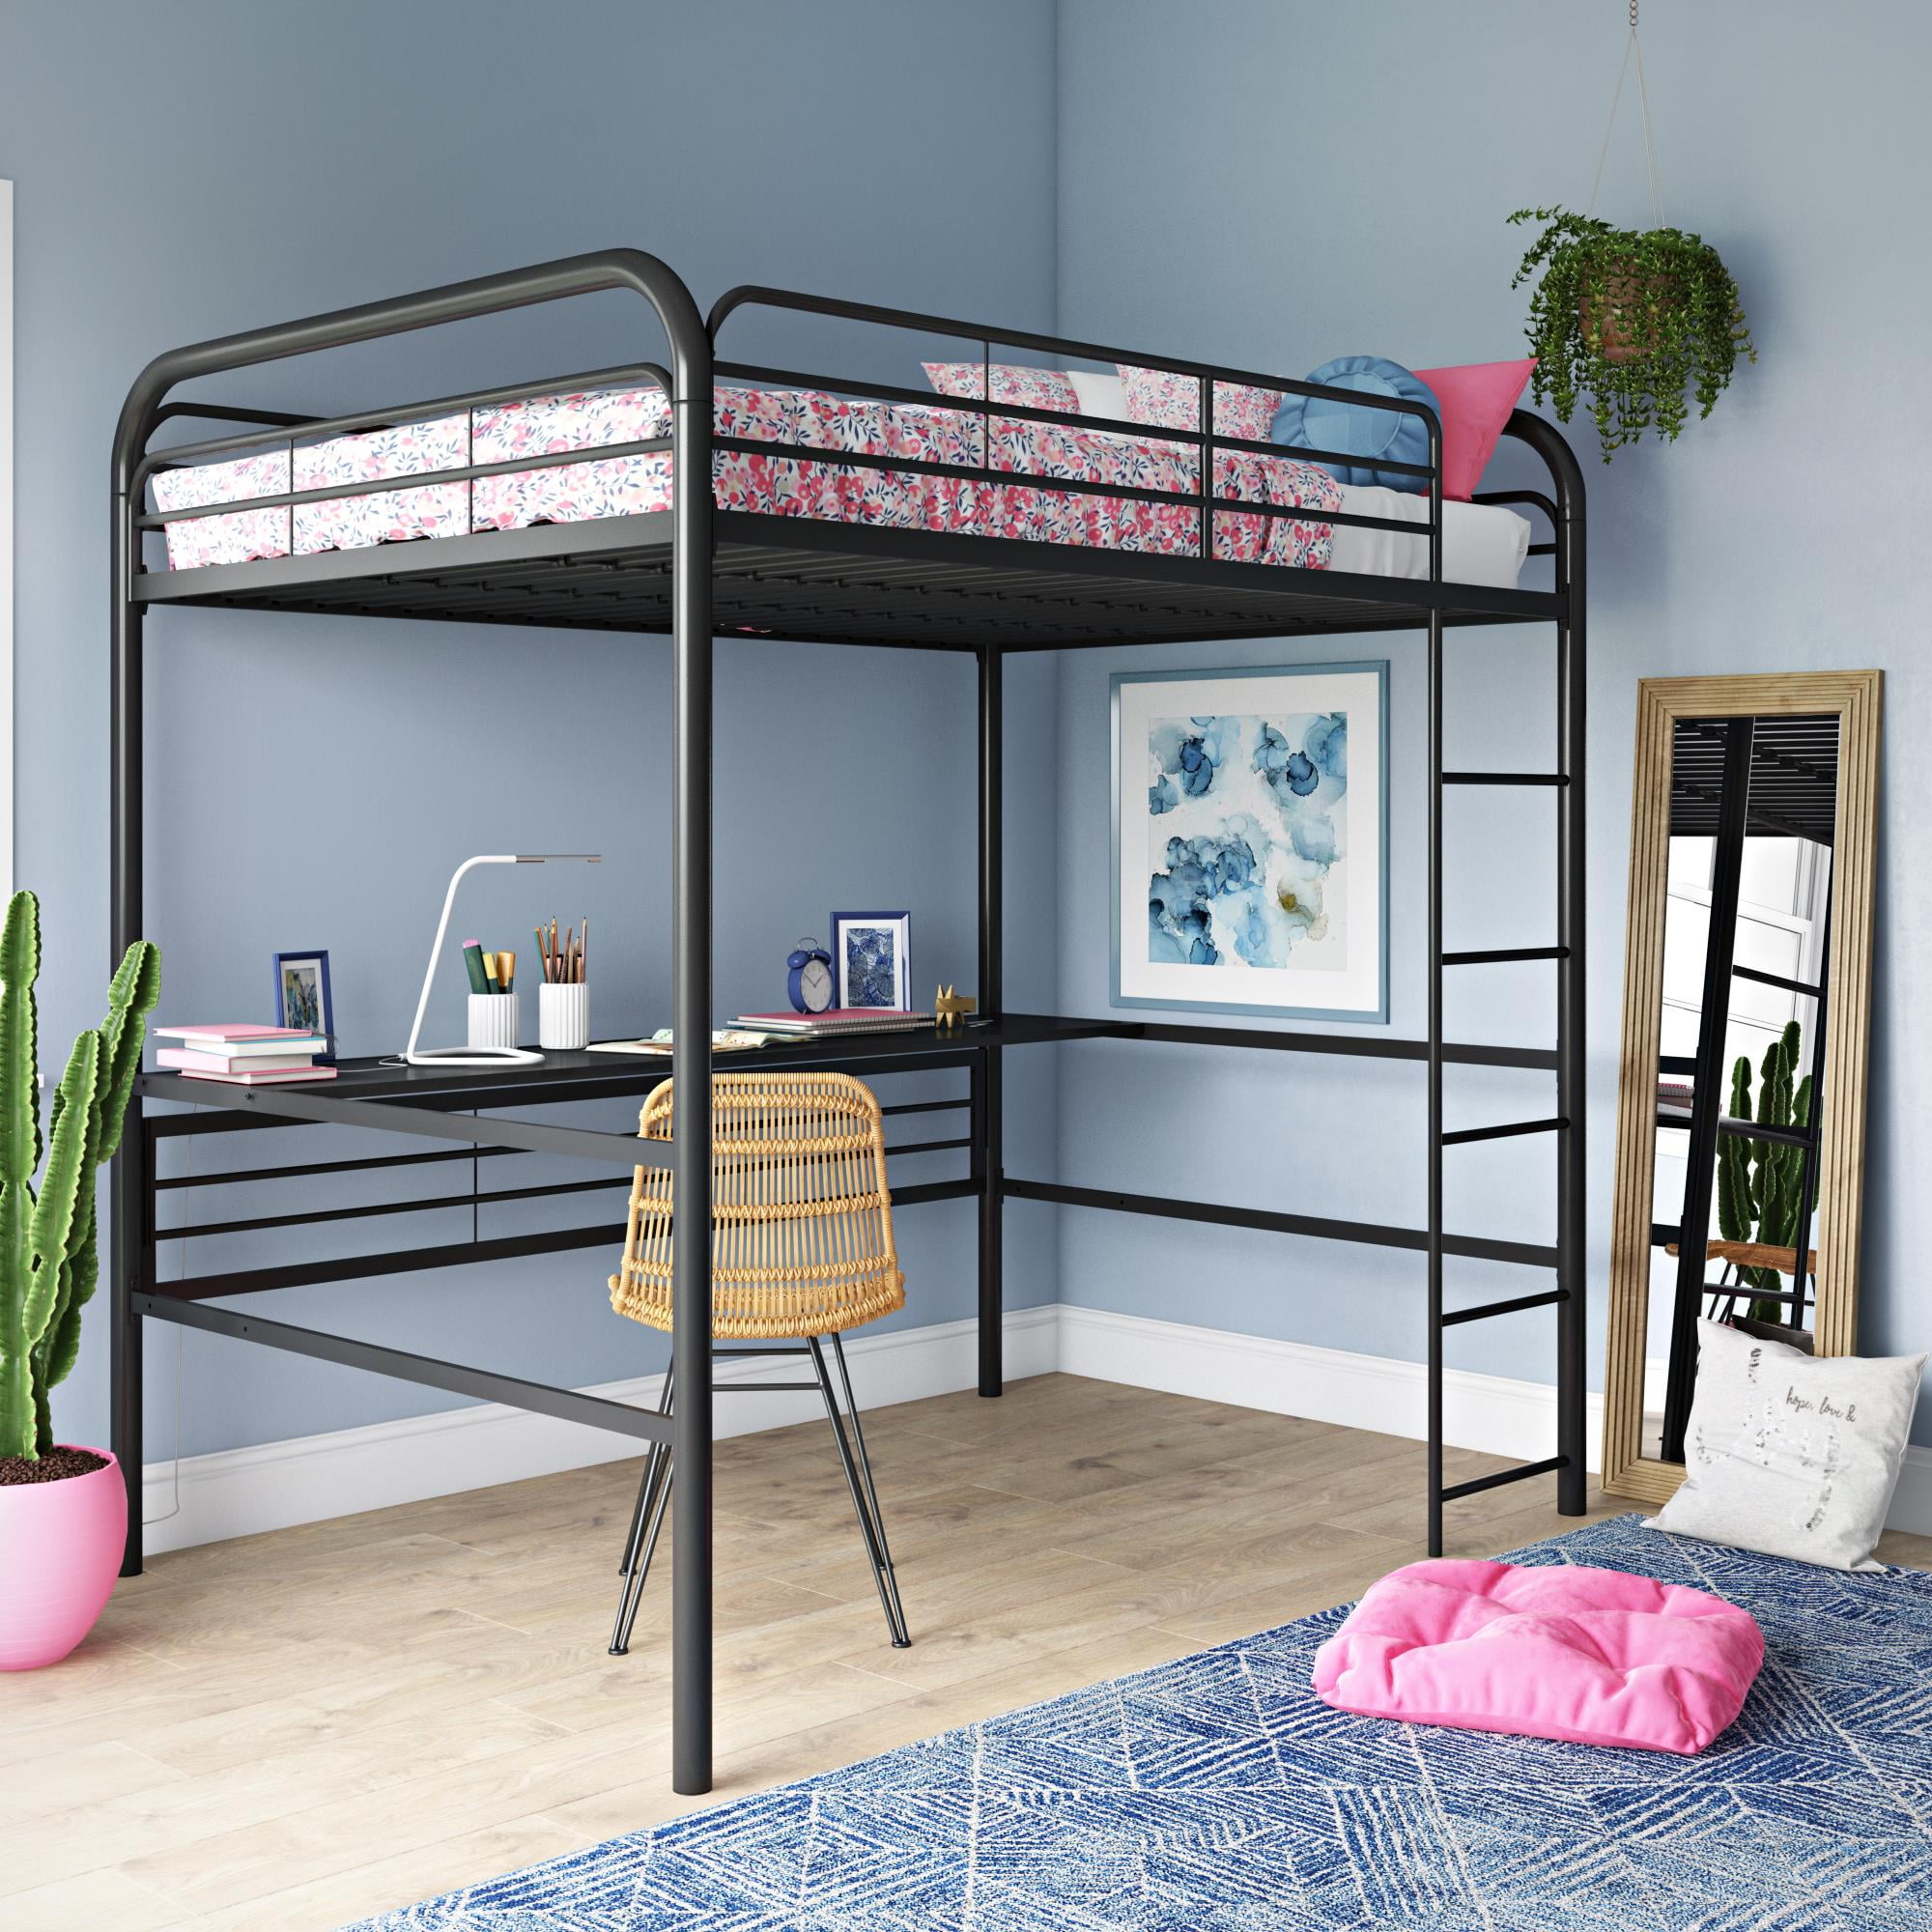 Dhp Metal Full Loft Bed With Desk, Black Full Size Bunk Bed With Desk